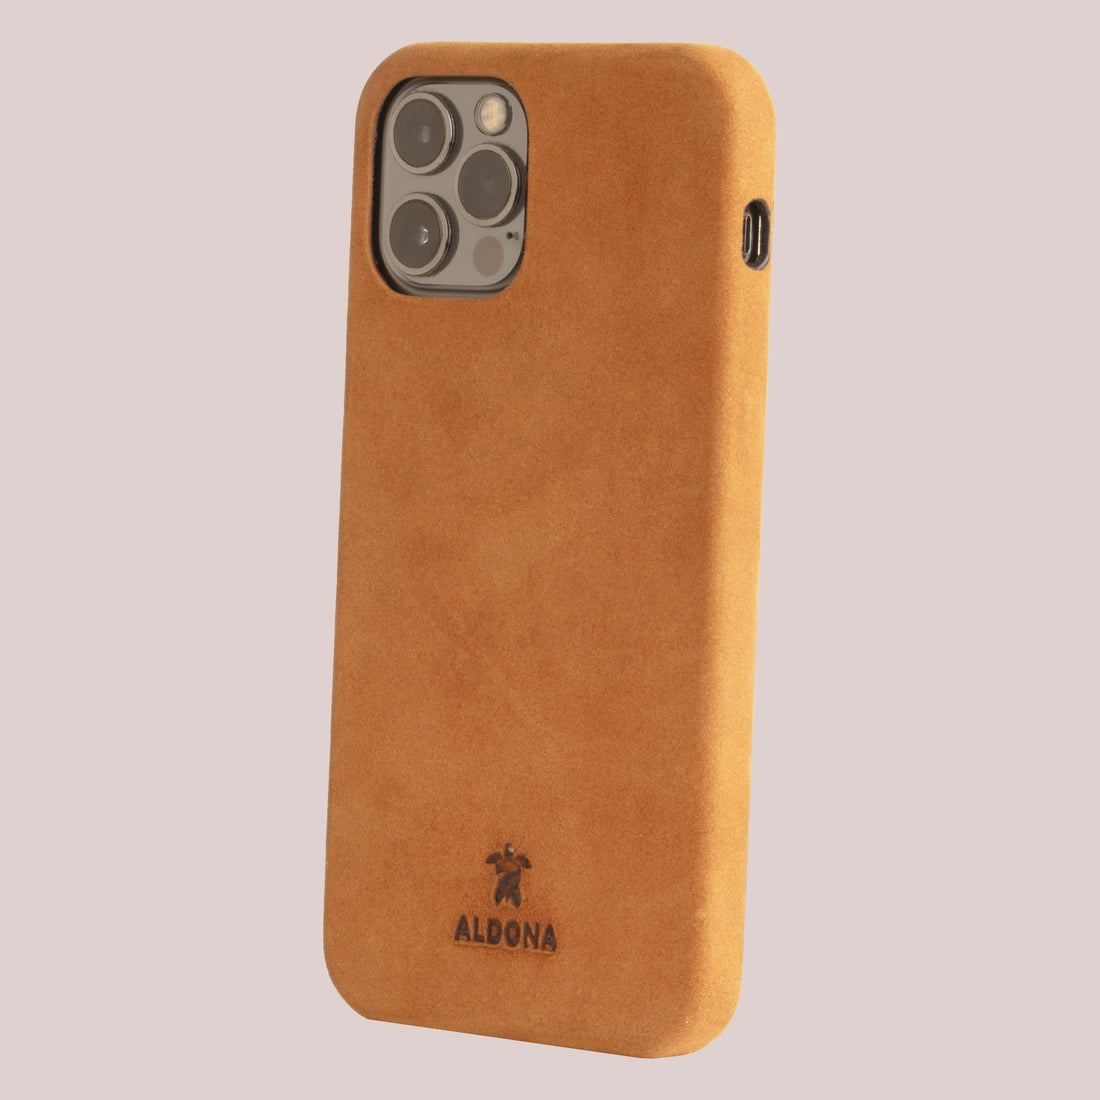 Kalon Case for iPhone 12 series with MagSafe Compatibility - Vintage Tan